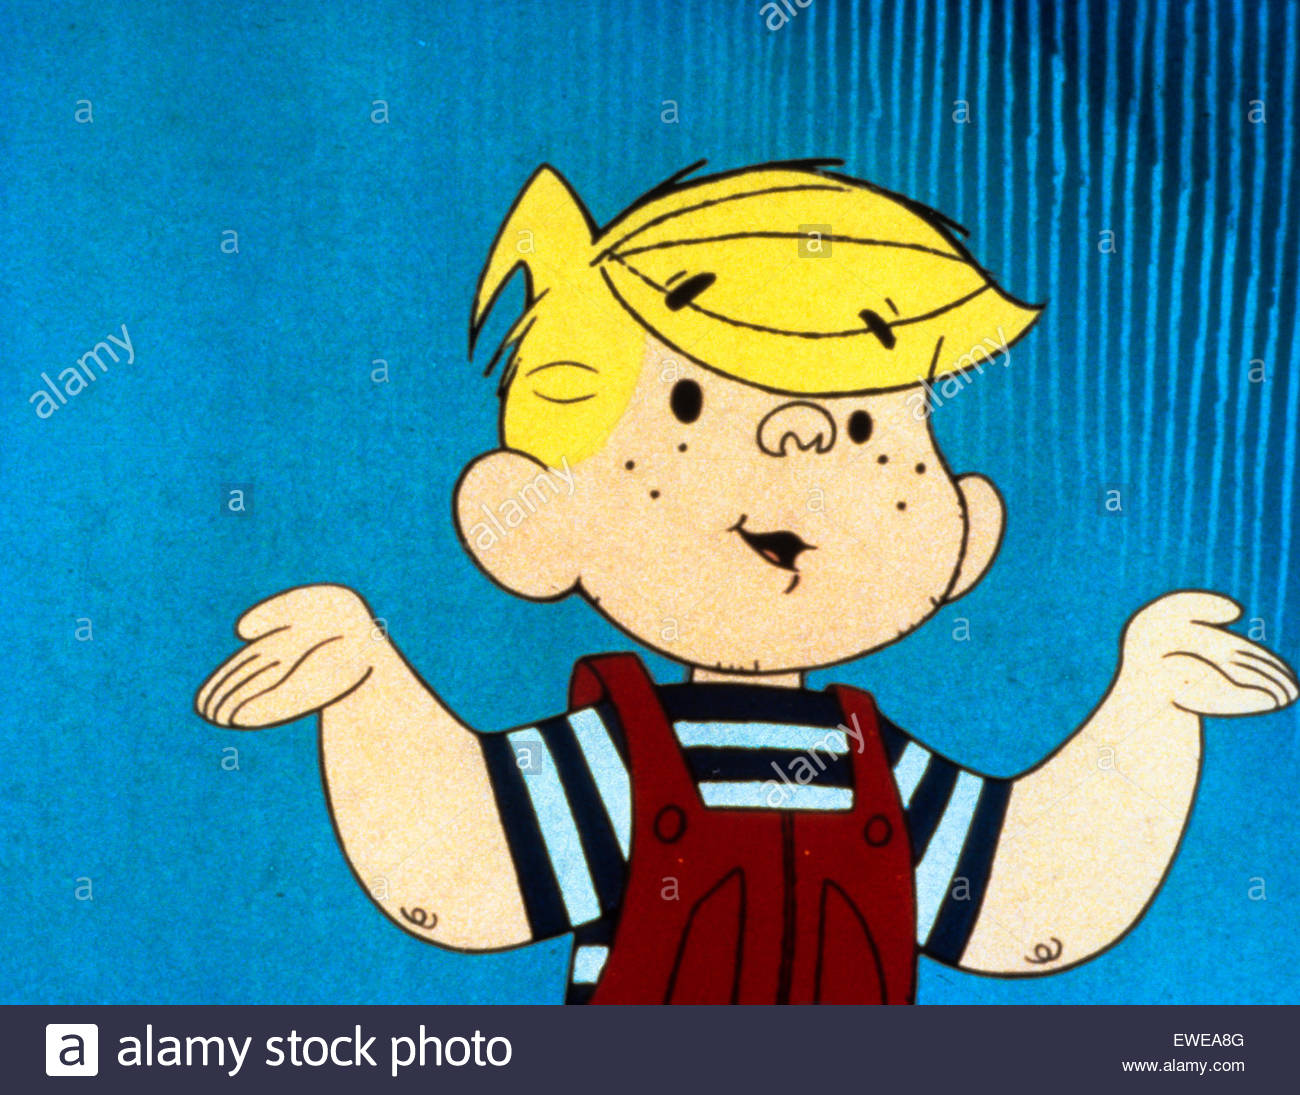 Dennis the Menace movies collection. Dennis the Menace... Who me?. Denis the Menace - Bamboleo. Denis the menace show